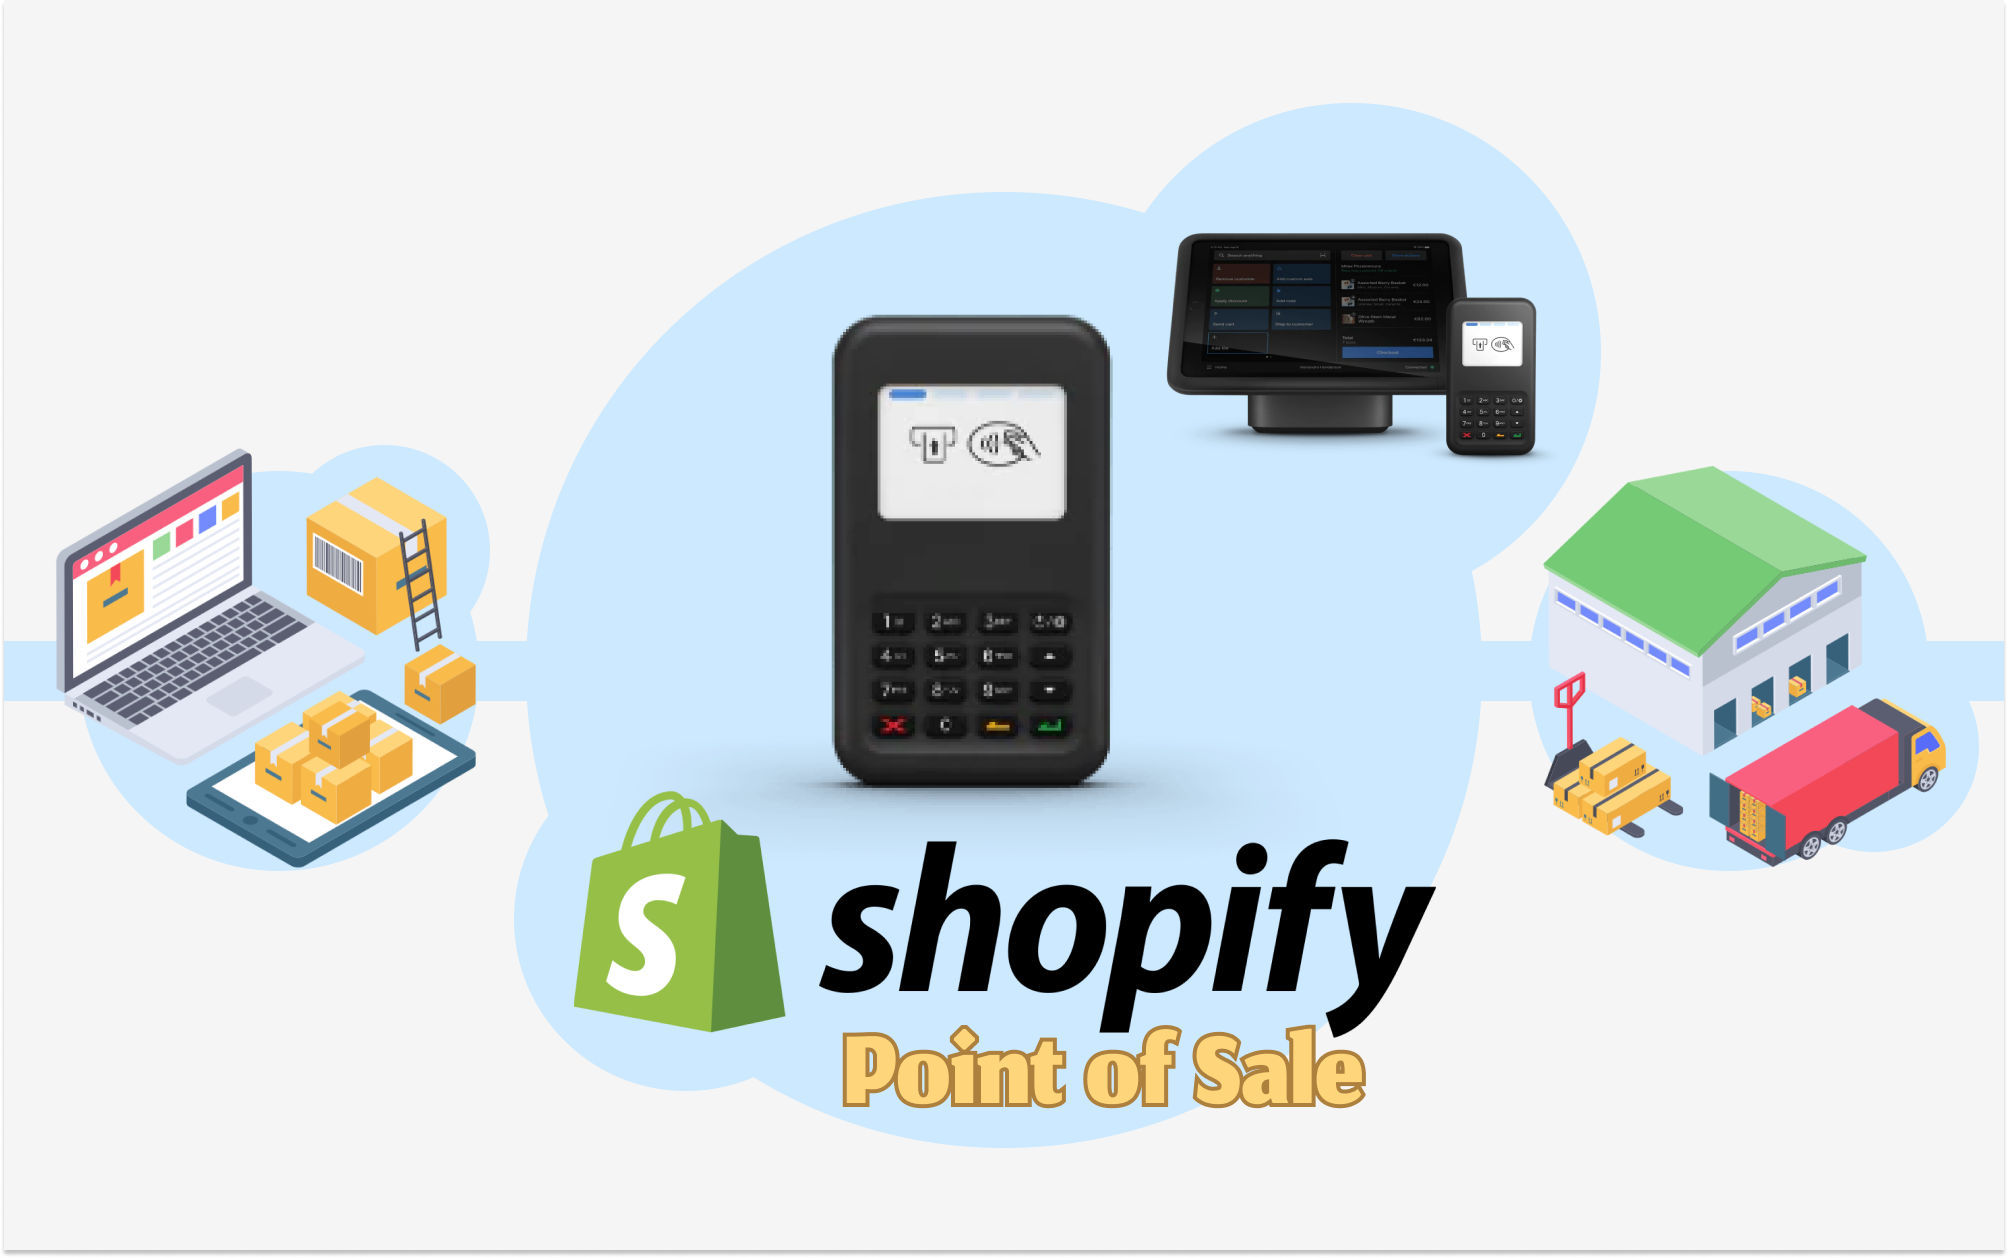 Shopify PoS - reviewing Shopify’s in-store payment solution